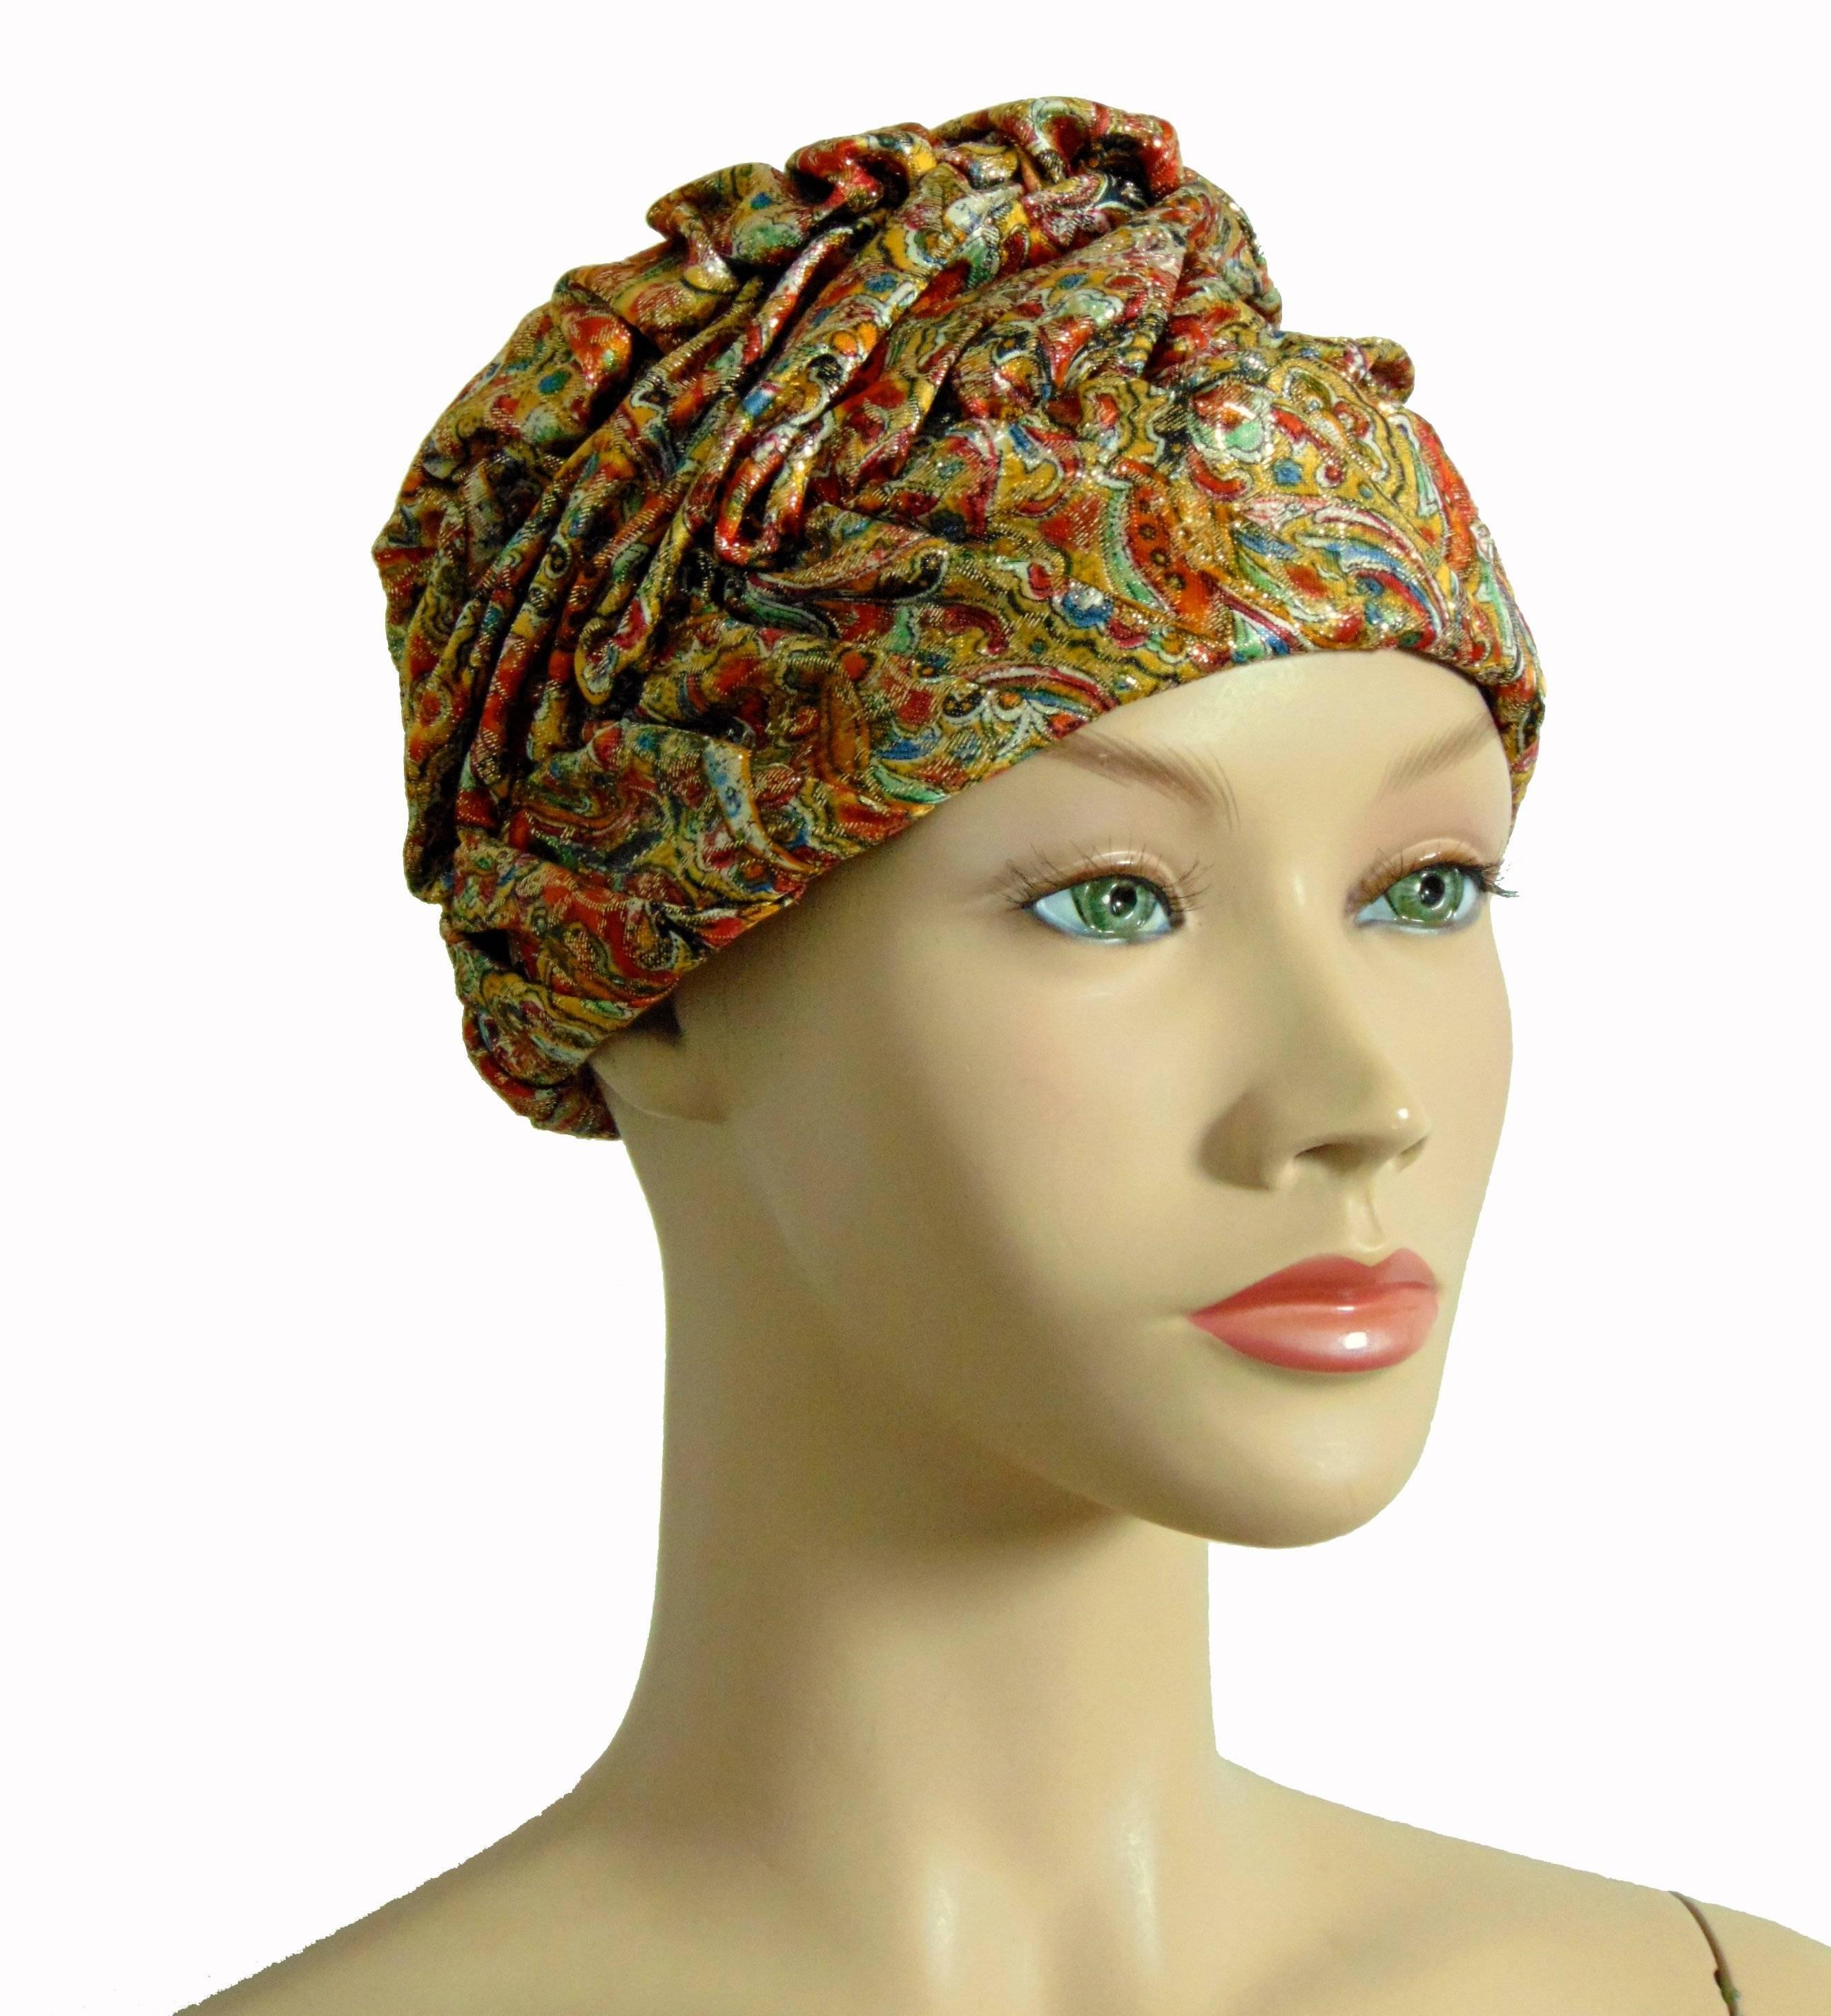 This fabulous hat or turban was made by Marshall Field & Company, most likely in the early 1950s. Made from a shimmery paisley fabric, it is fully lined in cream silk with netting overlay. In excellent condition, this piece would look amazing when